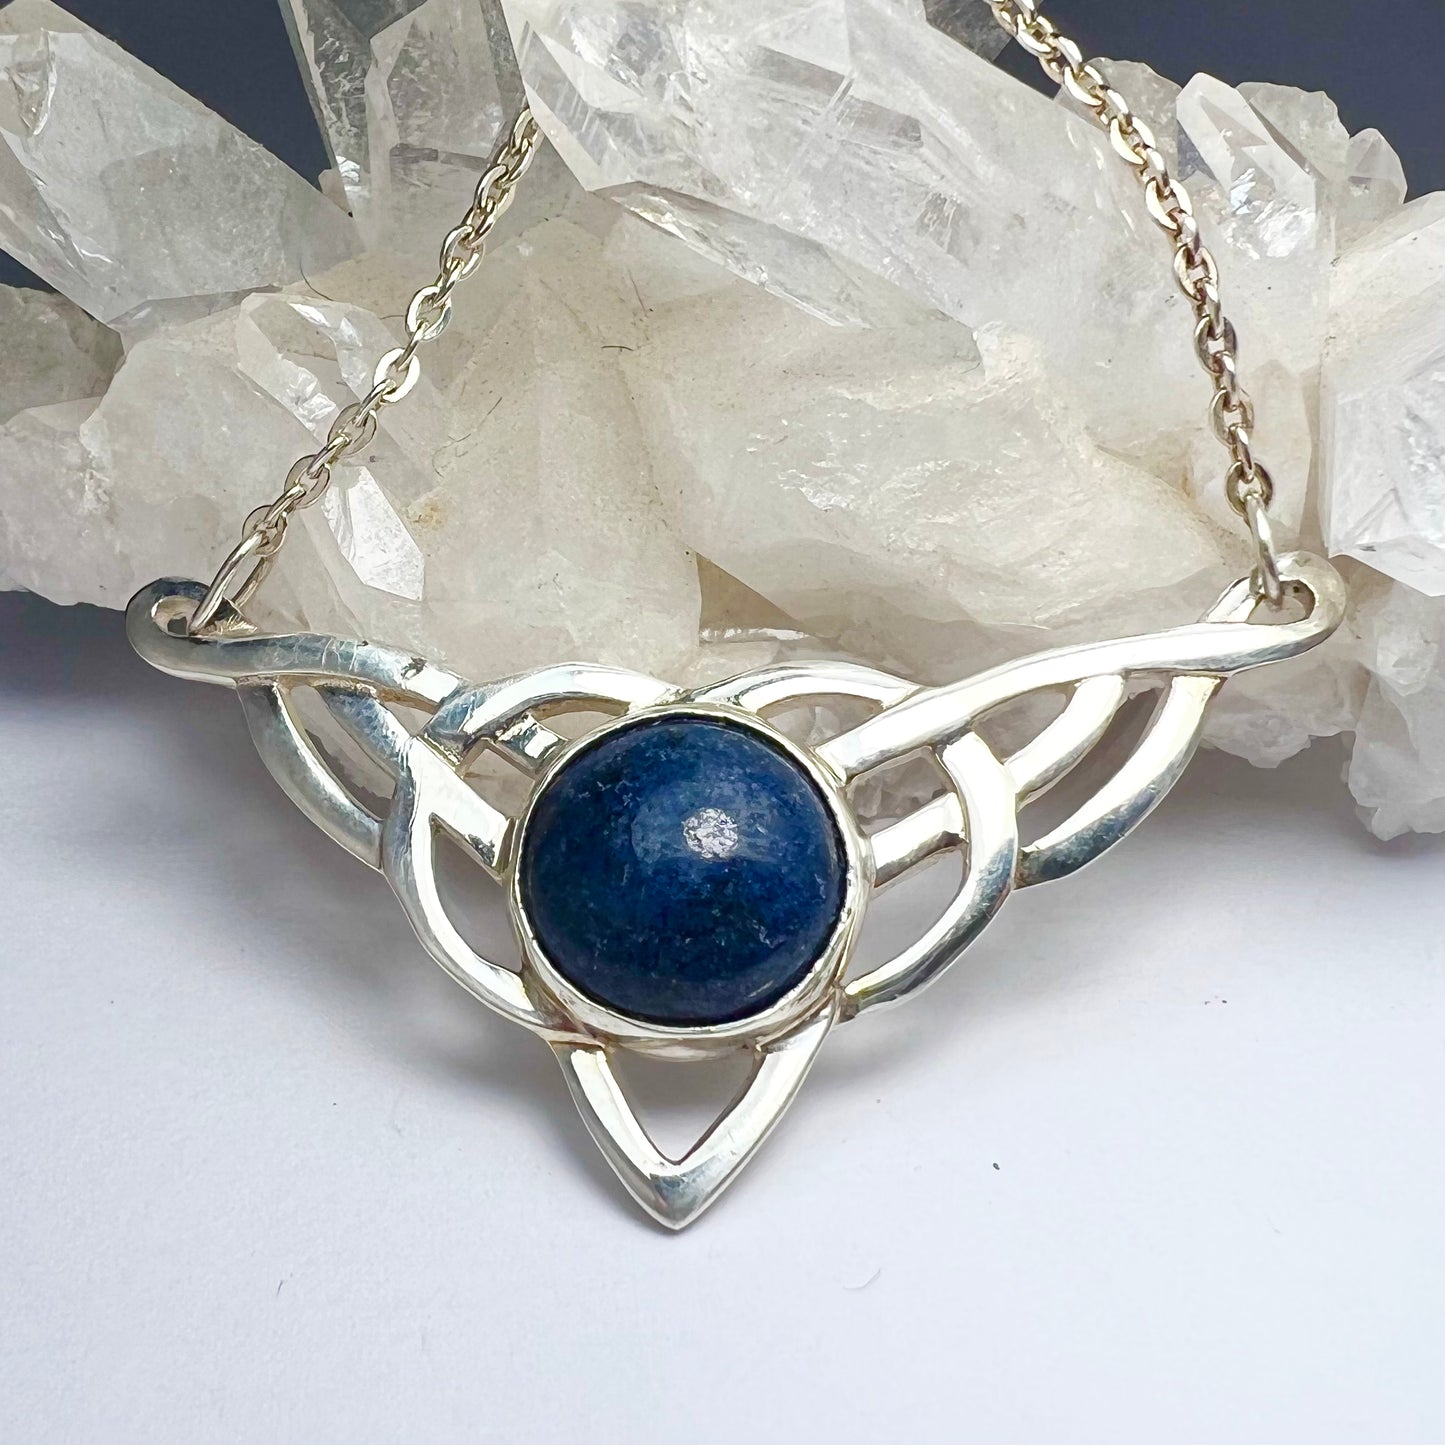 Lapis Lazuli and Sterling Silver